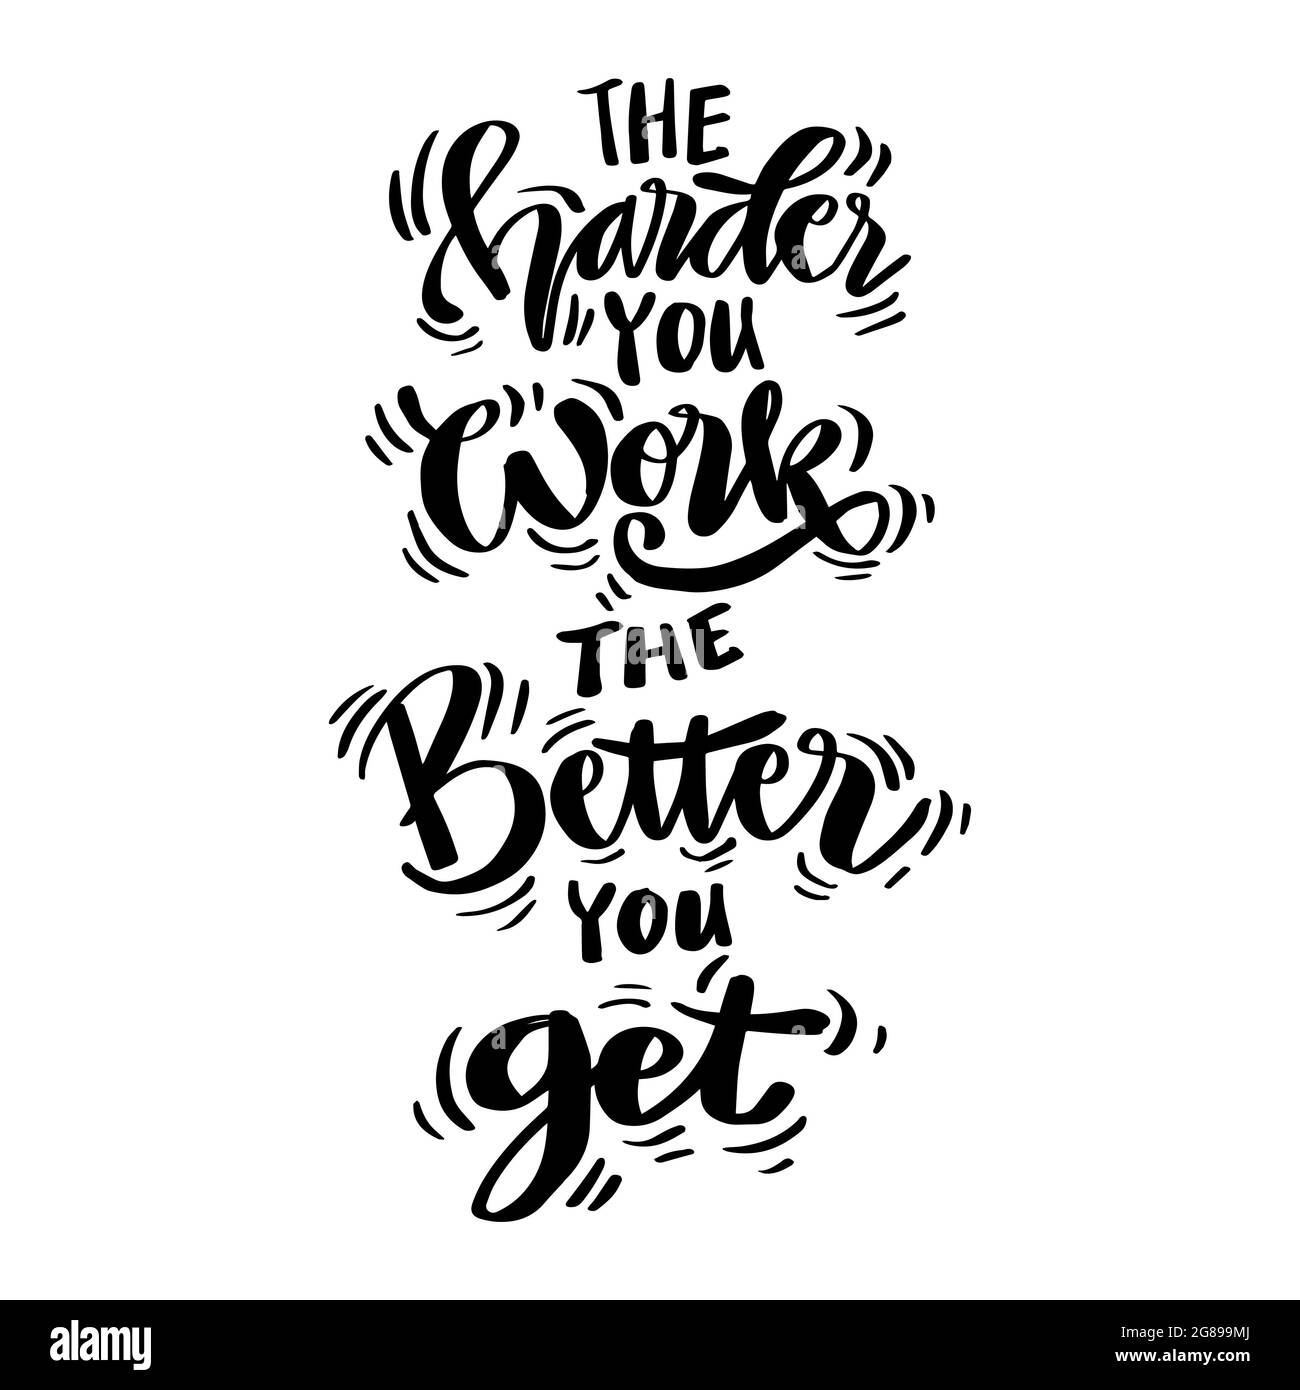 The harder you work the better you get. Hand lettering. Motivational quote. Stock Photo